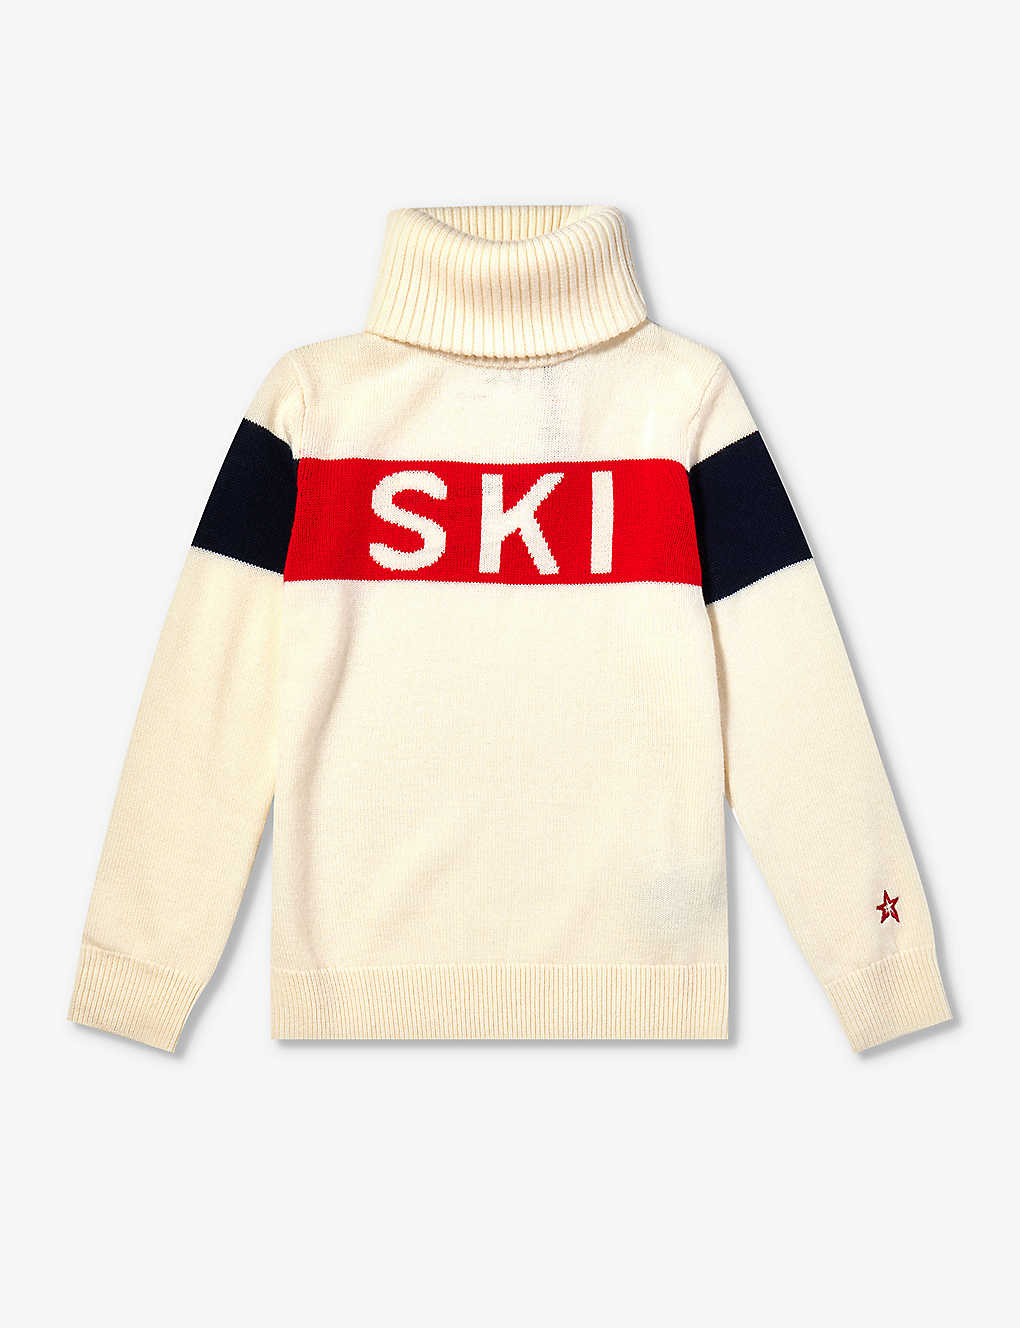 PERFECT MOMENT PERFECT MOMENT GIRLS SNOW WHITE KIDS SKI-INTARSIA ROLL-NECK VIRGIN-WOOL JUMPER 2-16 YEARS